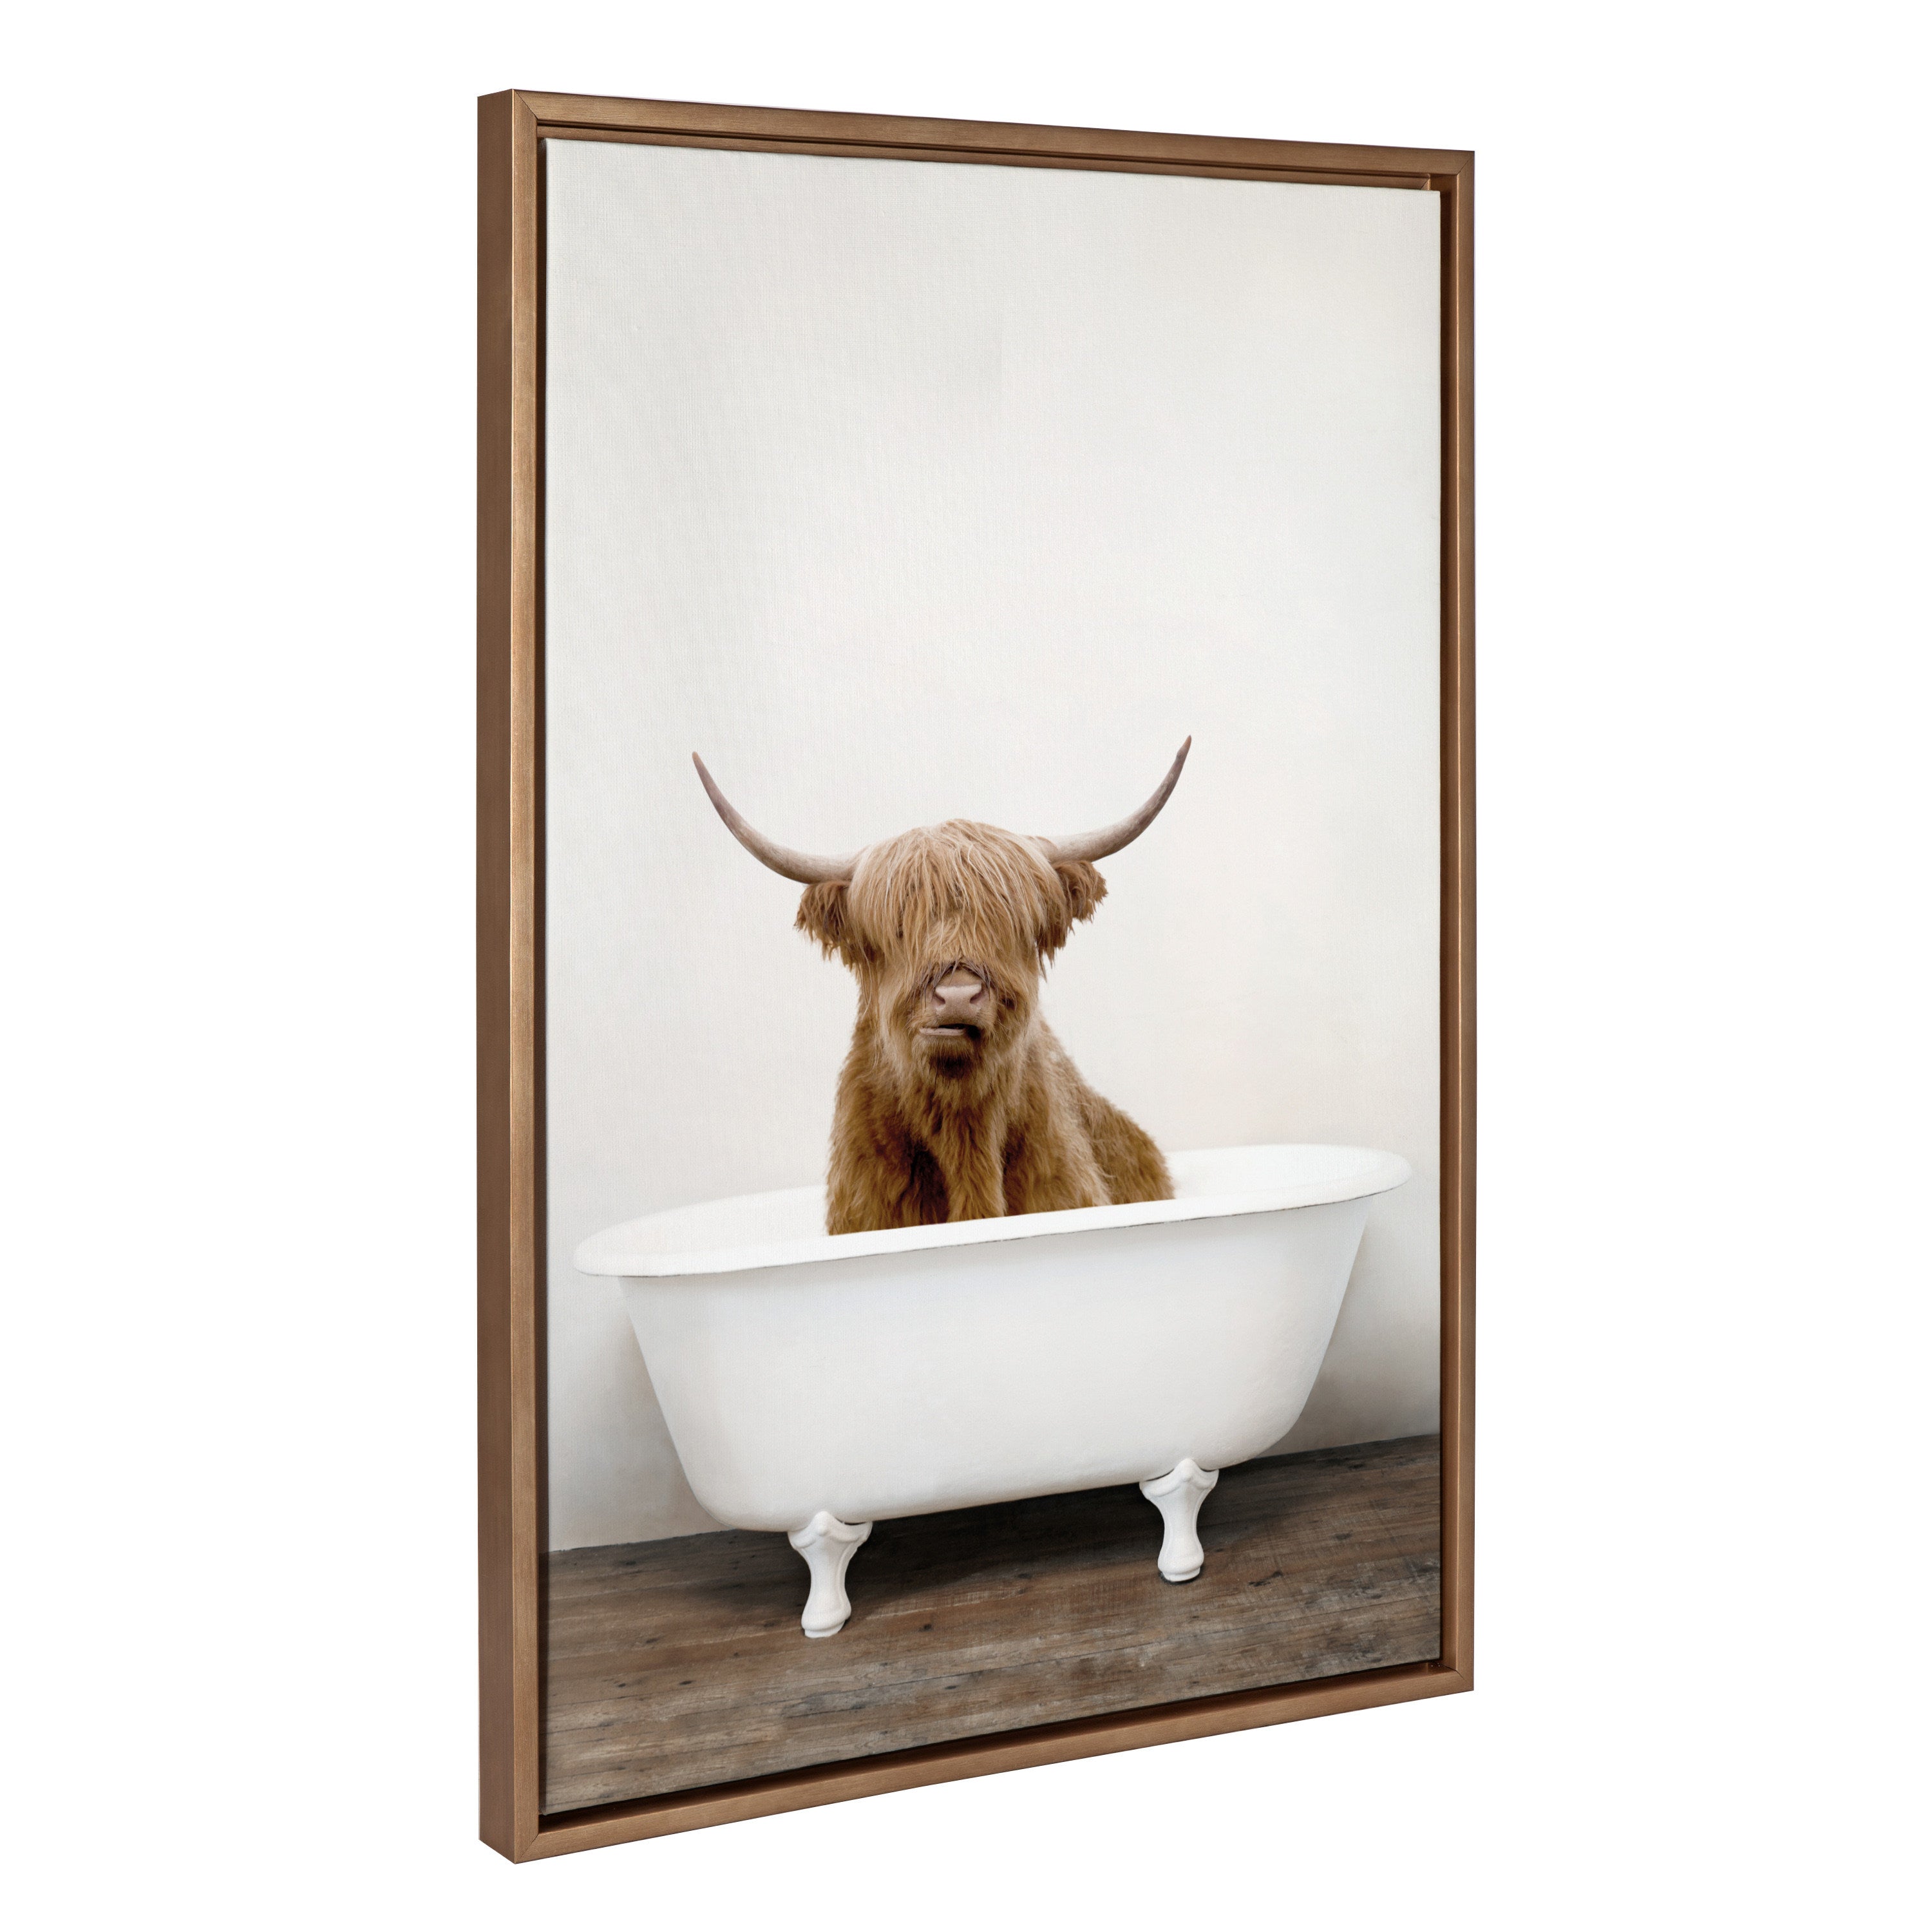 Sylvie Highland Cow in Tub Color Framed Canvas by Amy Peterson Art Studio